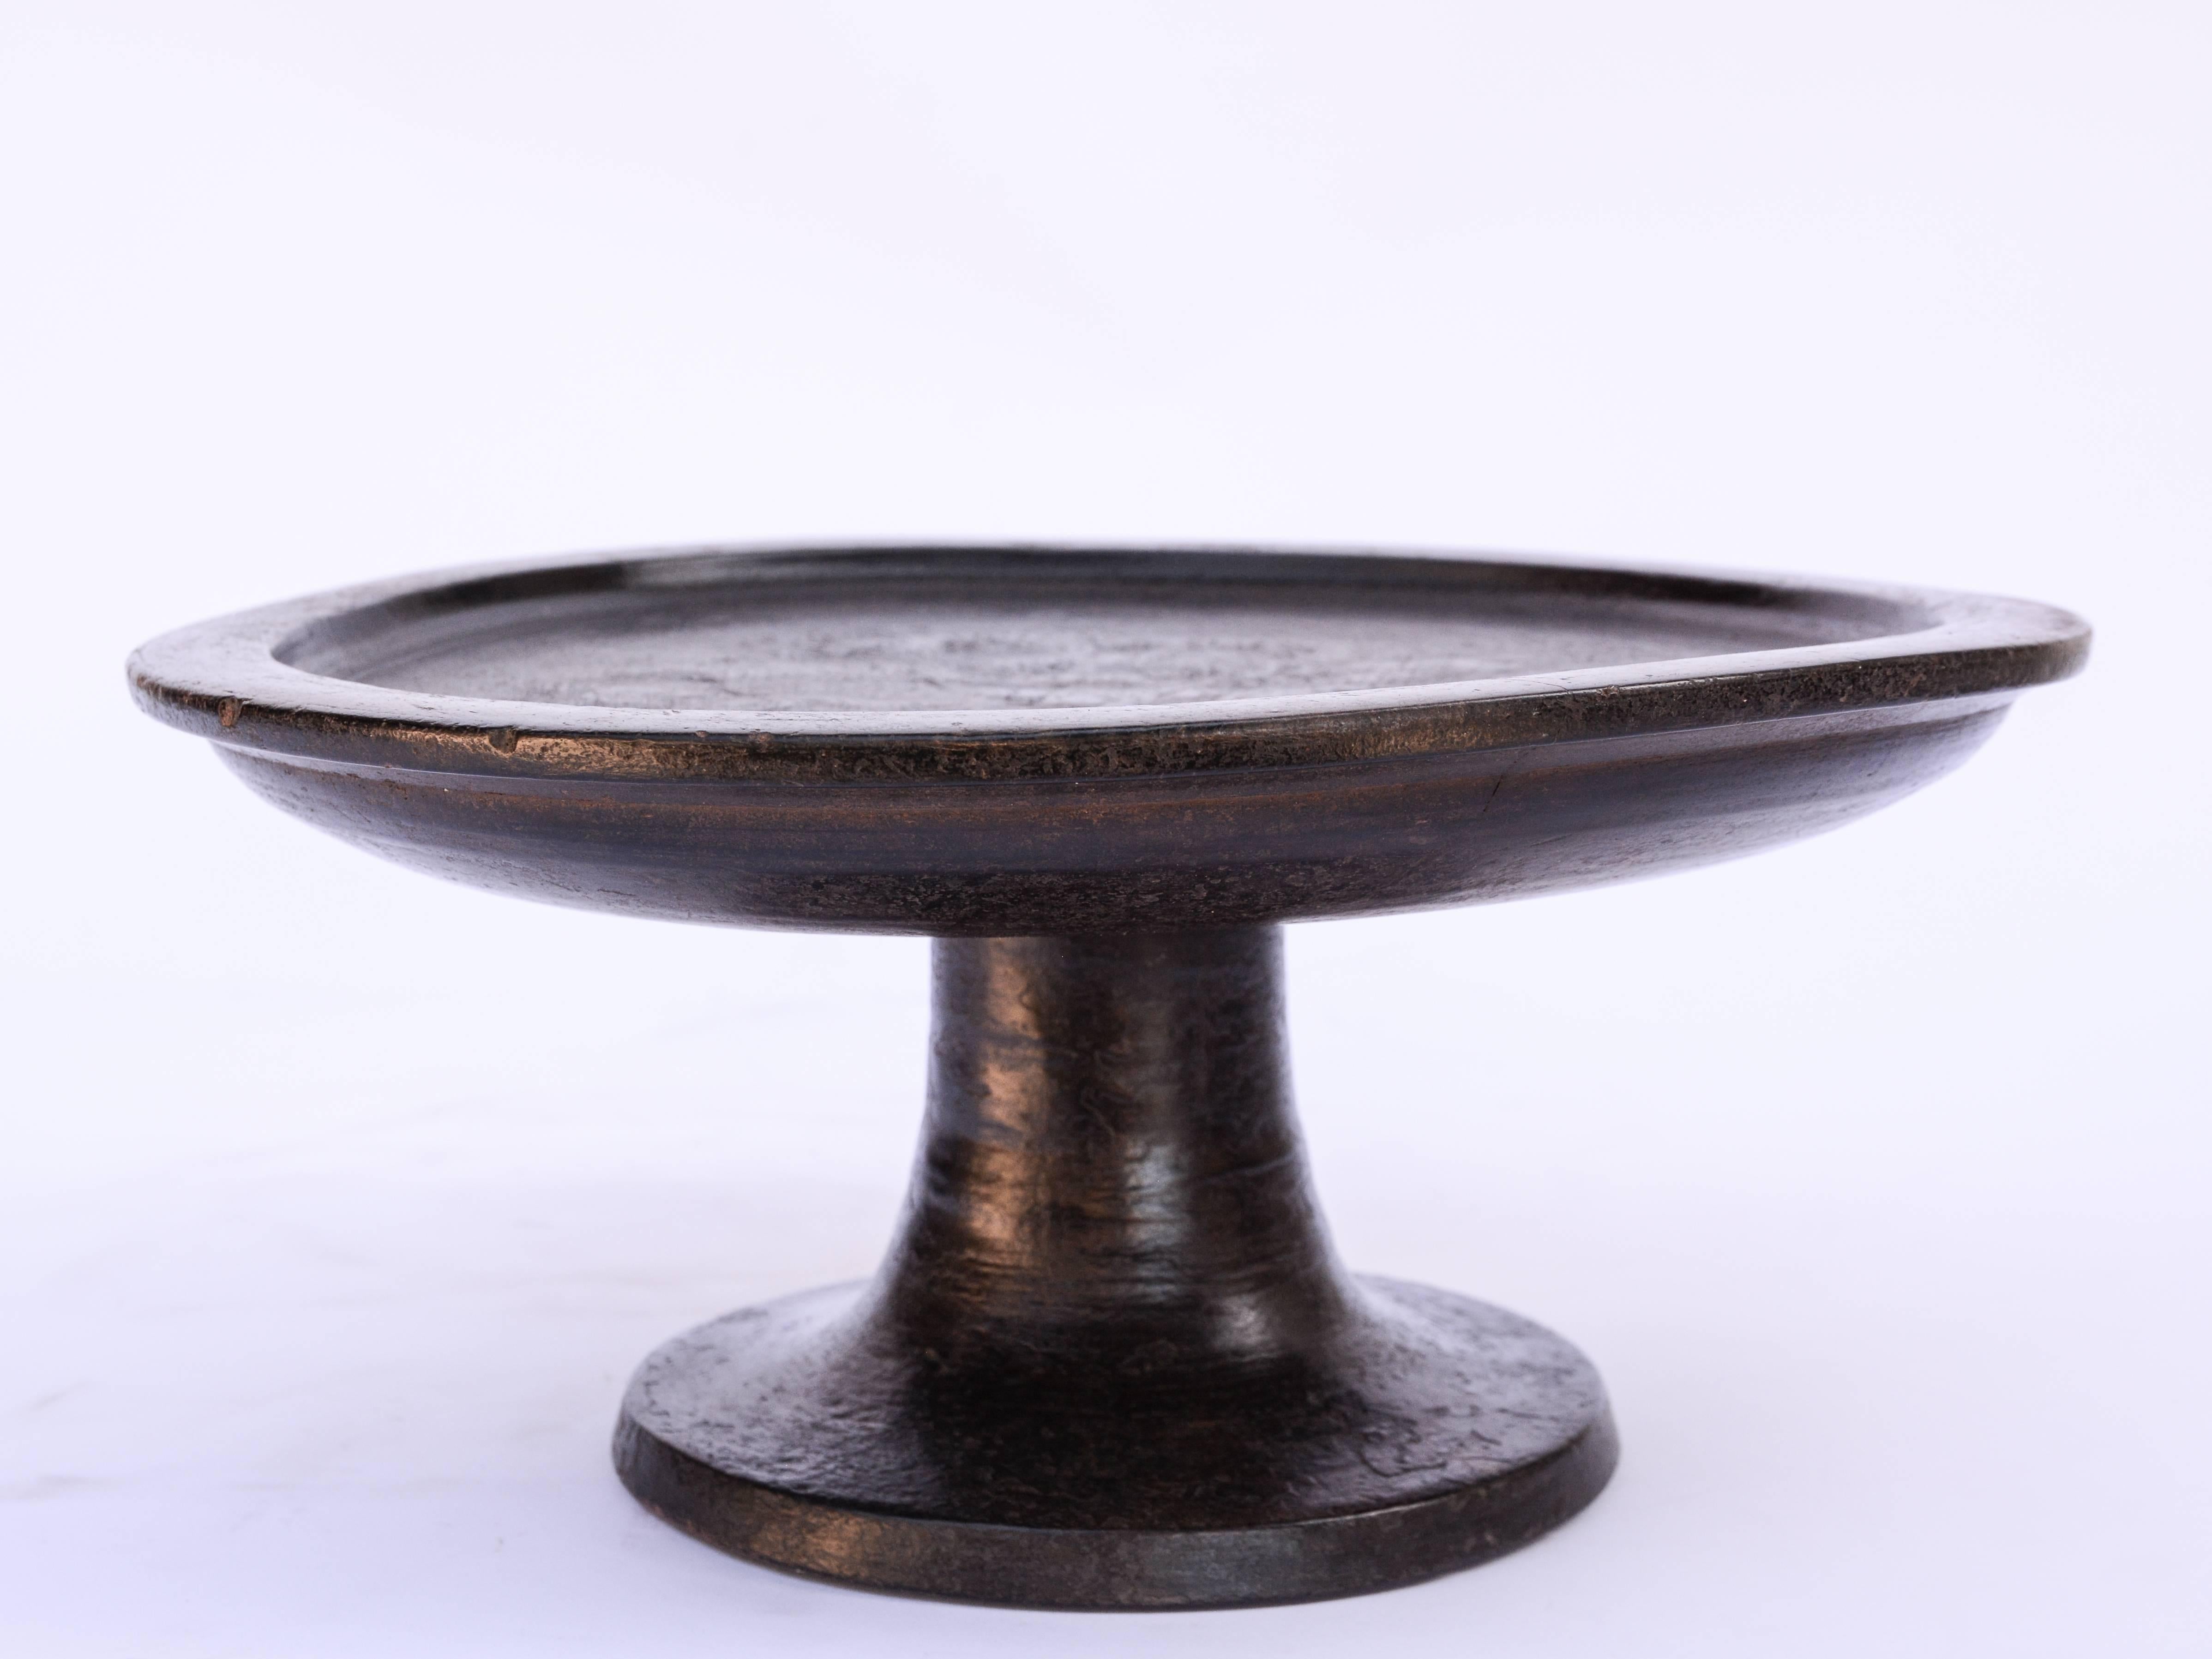 Wooden offering tray on stand, Bali, mid-20th century.
Offered by Bruce Hughes.
This pedestal tray was used in elaborate Balinese rituals to bring offerings of fruit and flowers and present them to the spirits honoured in the ceremony. It is